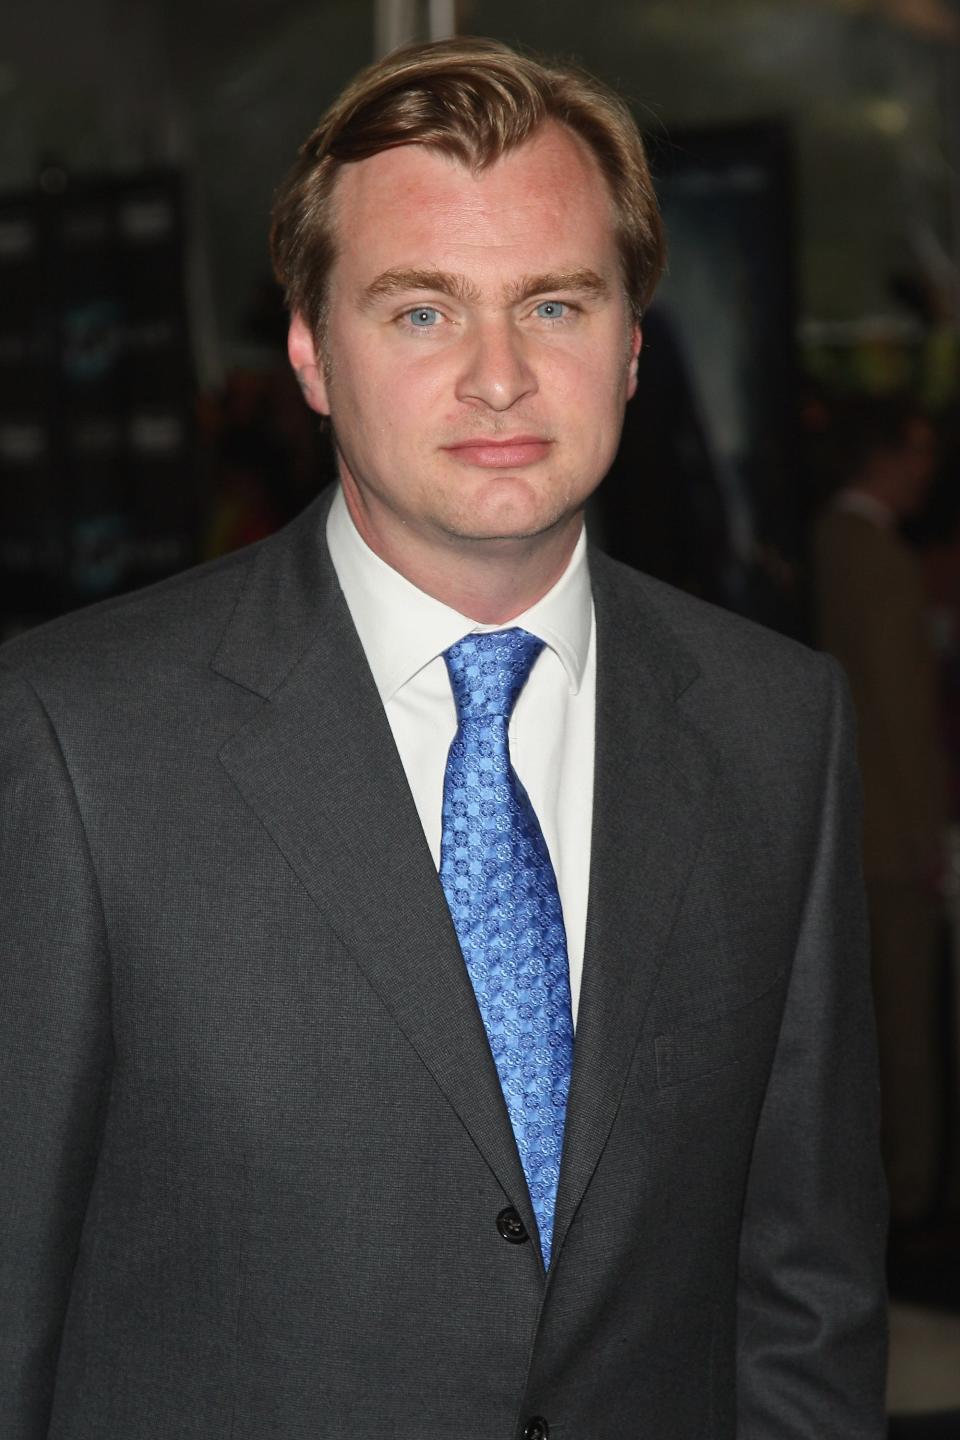 Christopher Nolan in a grey suit and blue tie